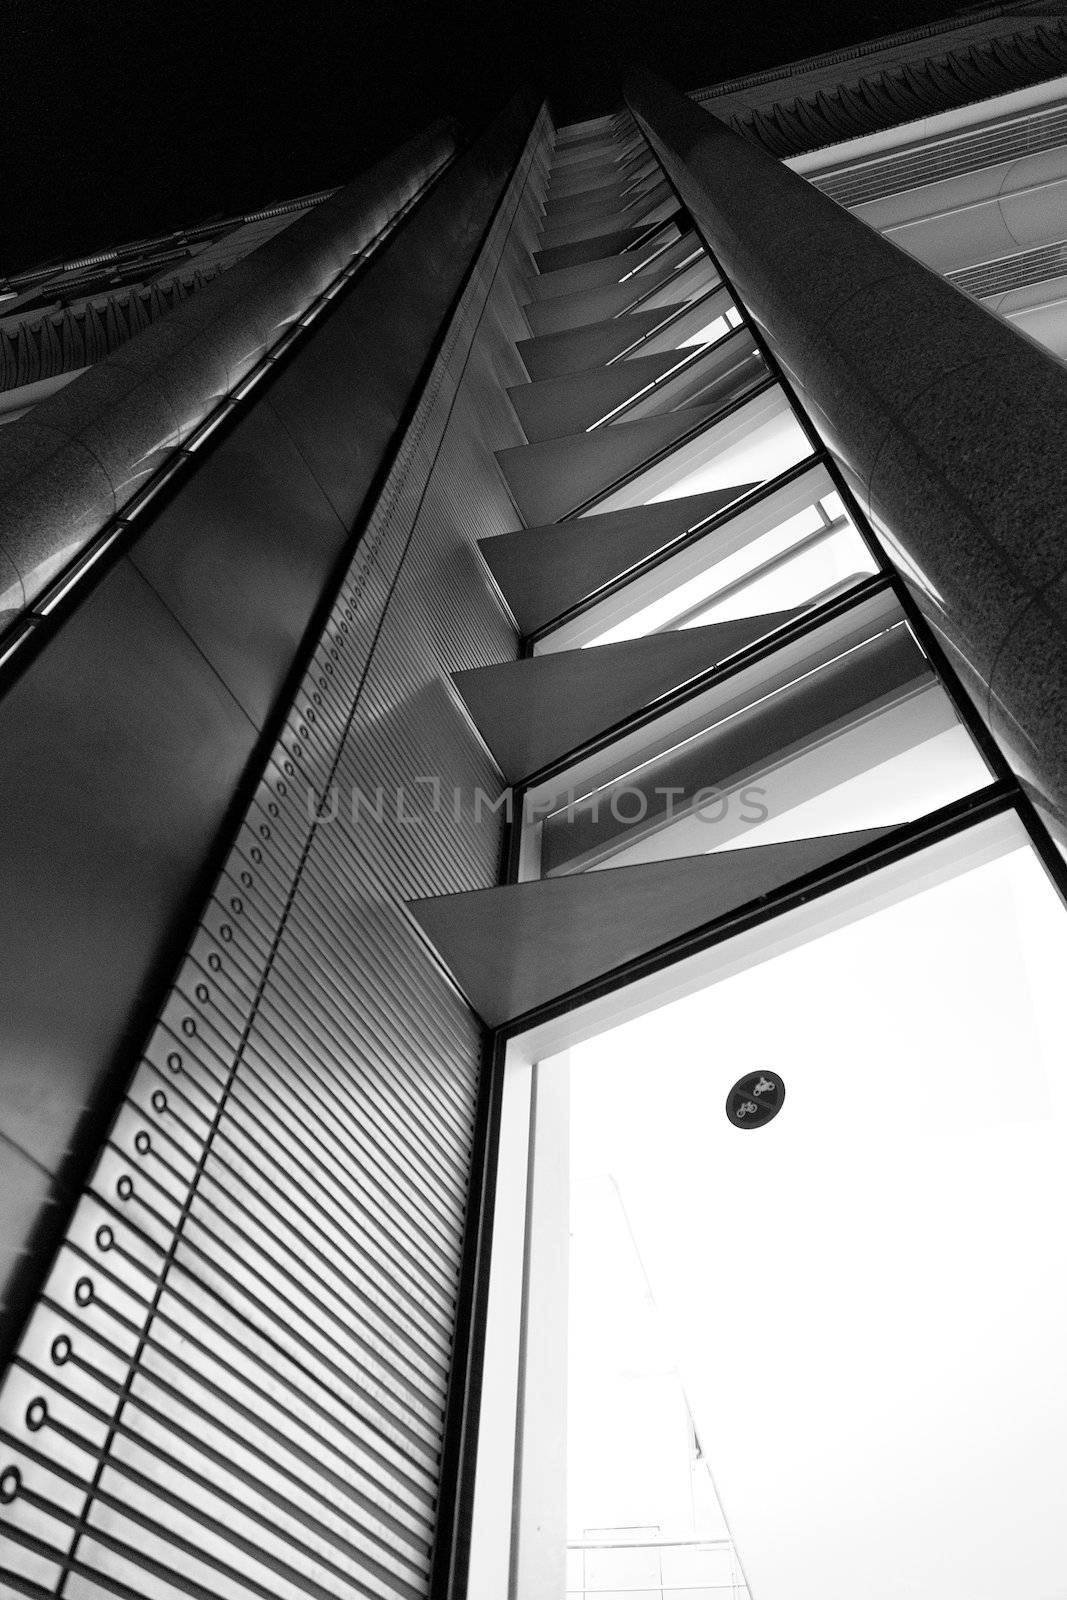 Details of building architecture in the European District of Brussels - Black and White